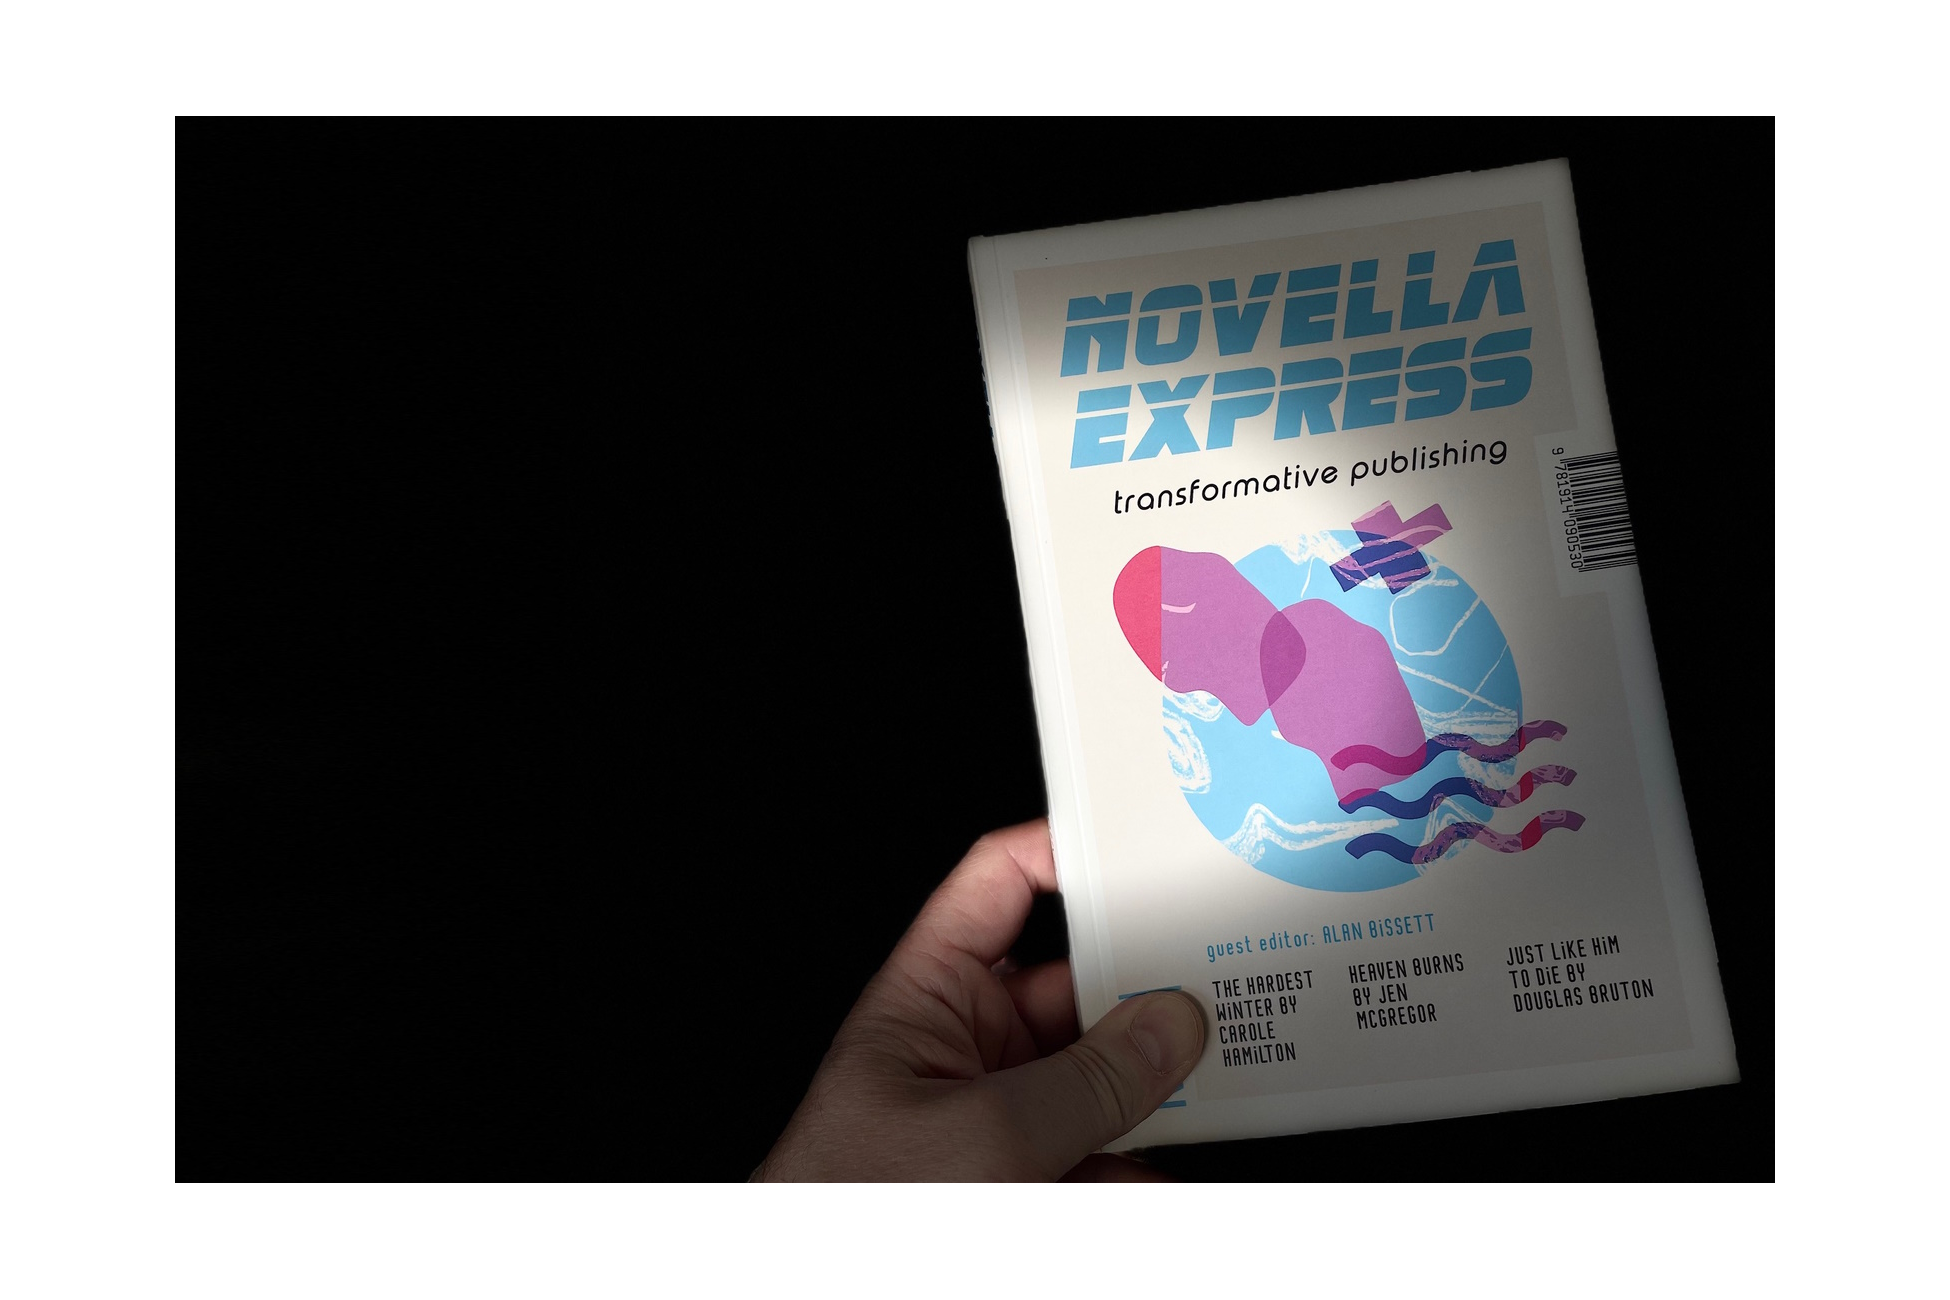 novella express and a hand and a dark background